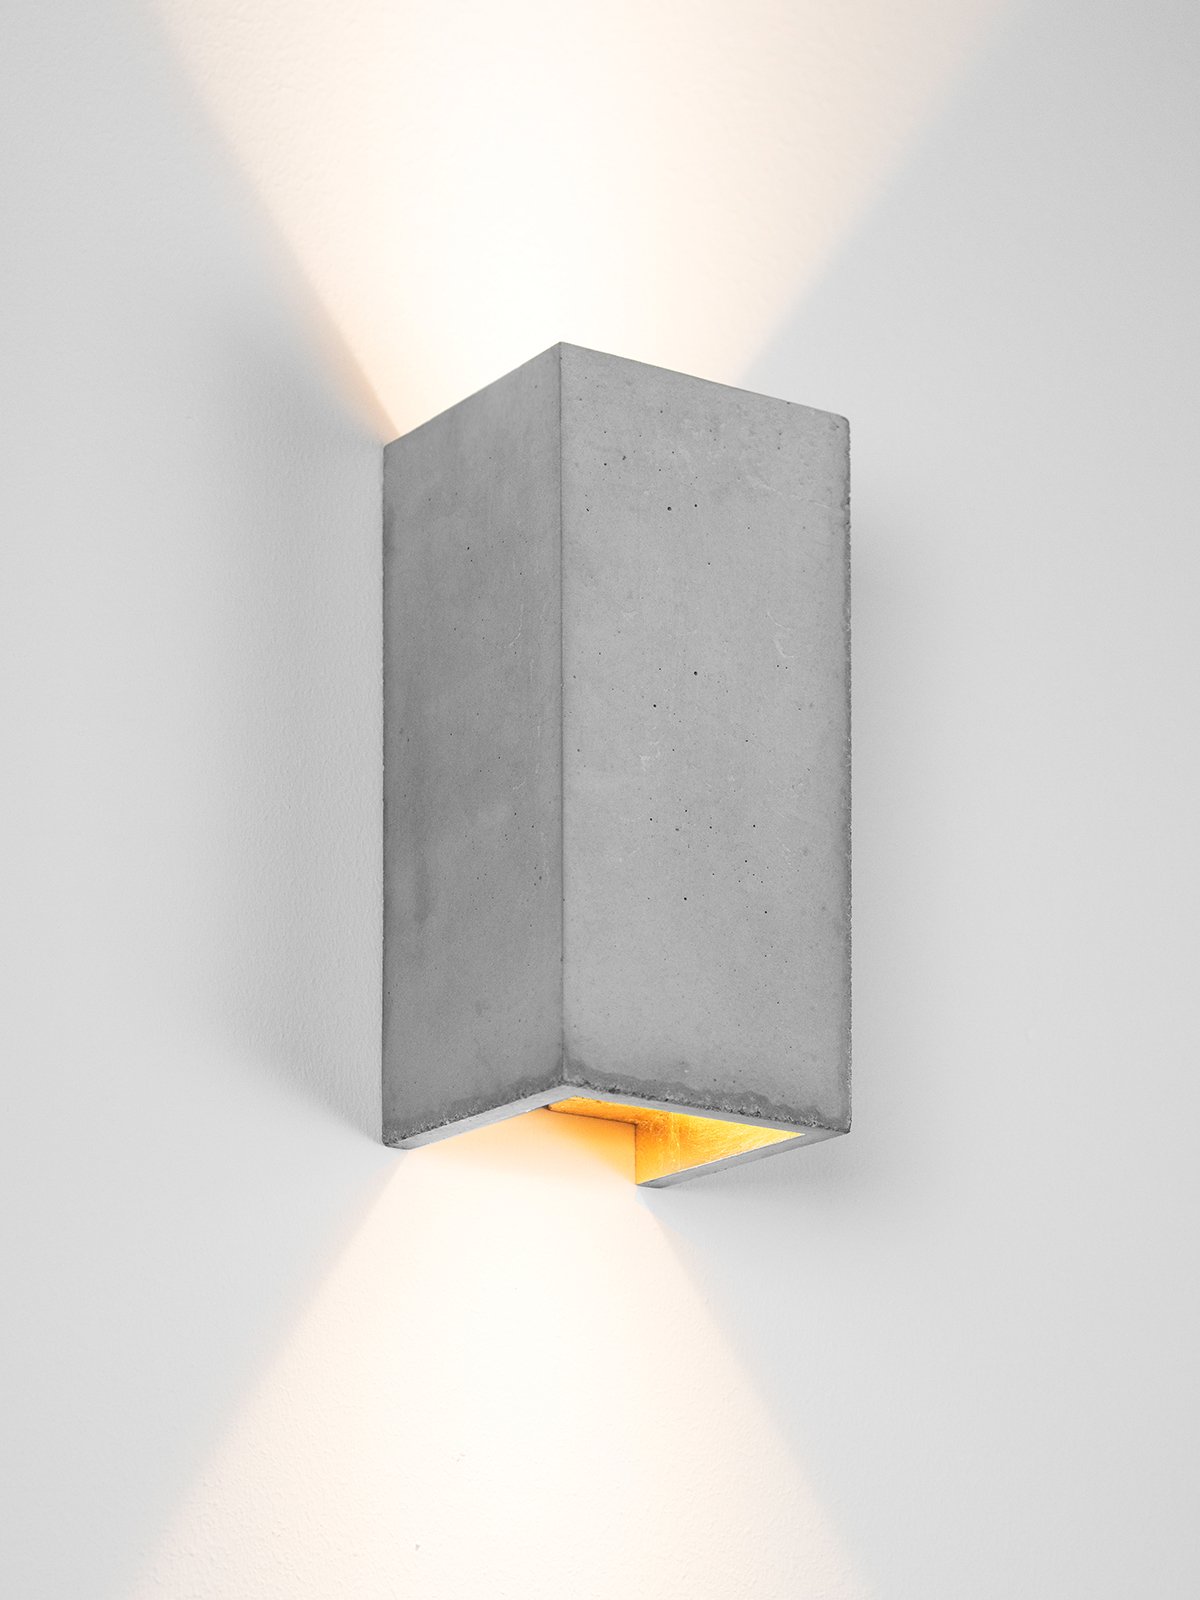 B8] Wall lamp and cubic up down light gold